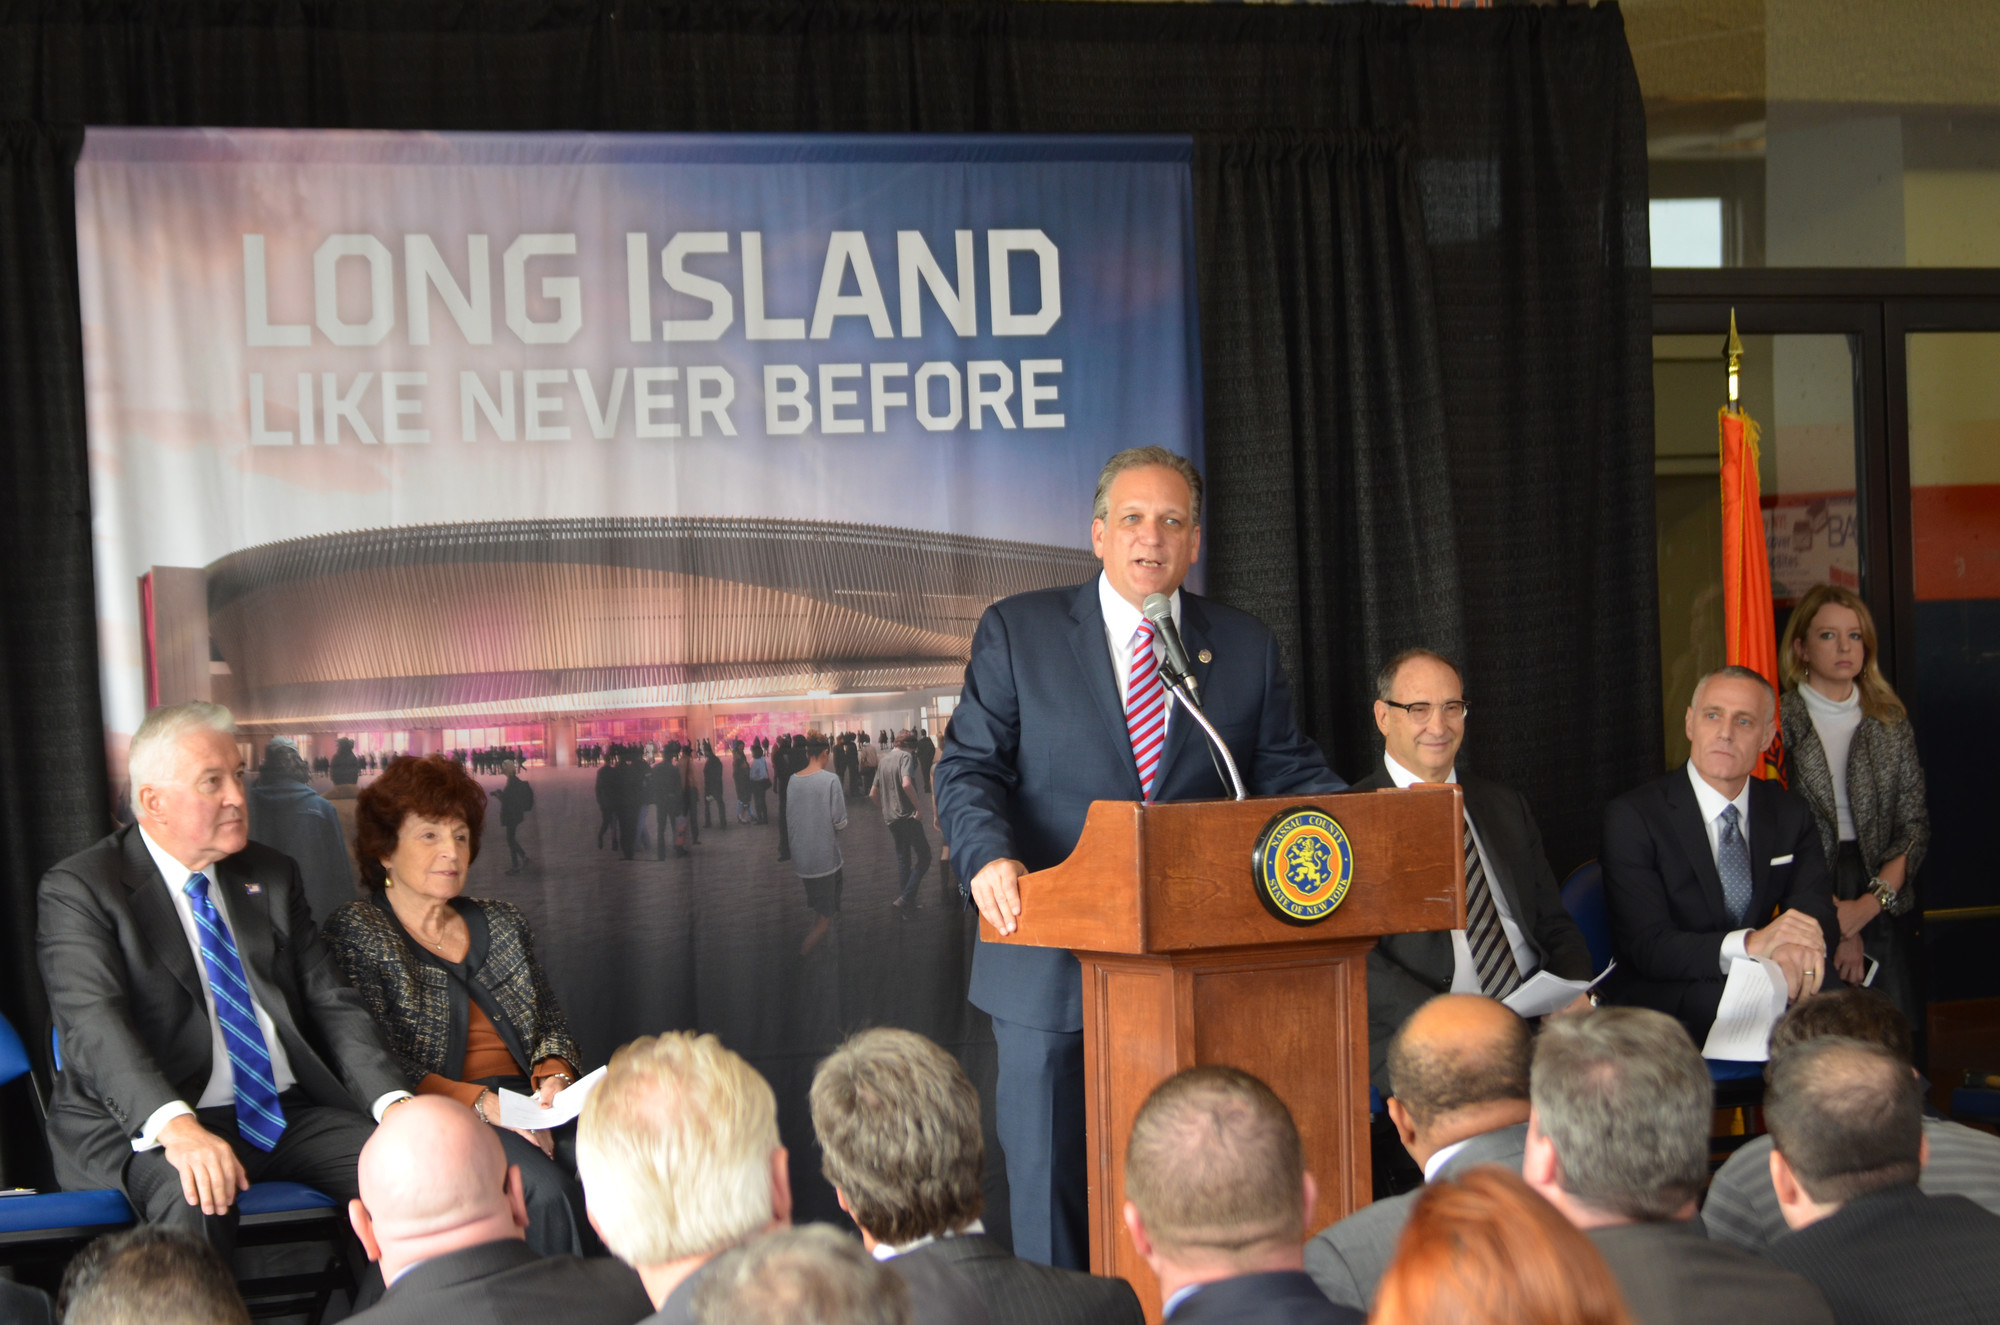 Several officials spoke at the ceremony, including Dick O’Kane, president of the Nassau-Suffolk Building Construction Trades Council; Norma Gonsalves, presiding officer of the Nassau County Legislature; Mangano, above; Ratner and Brett Yormark, CEO of Barclays Center.